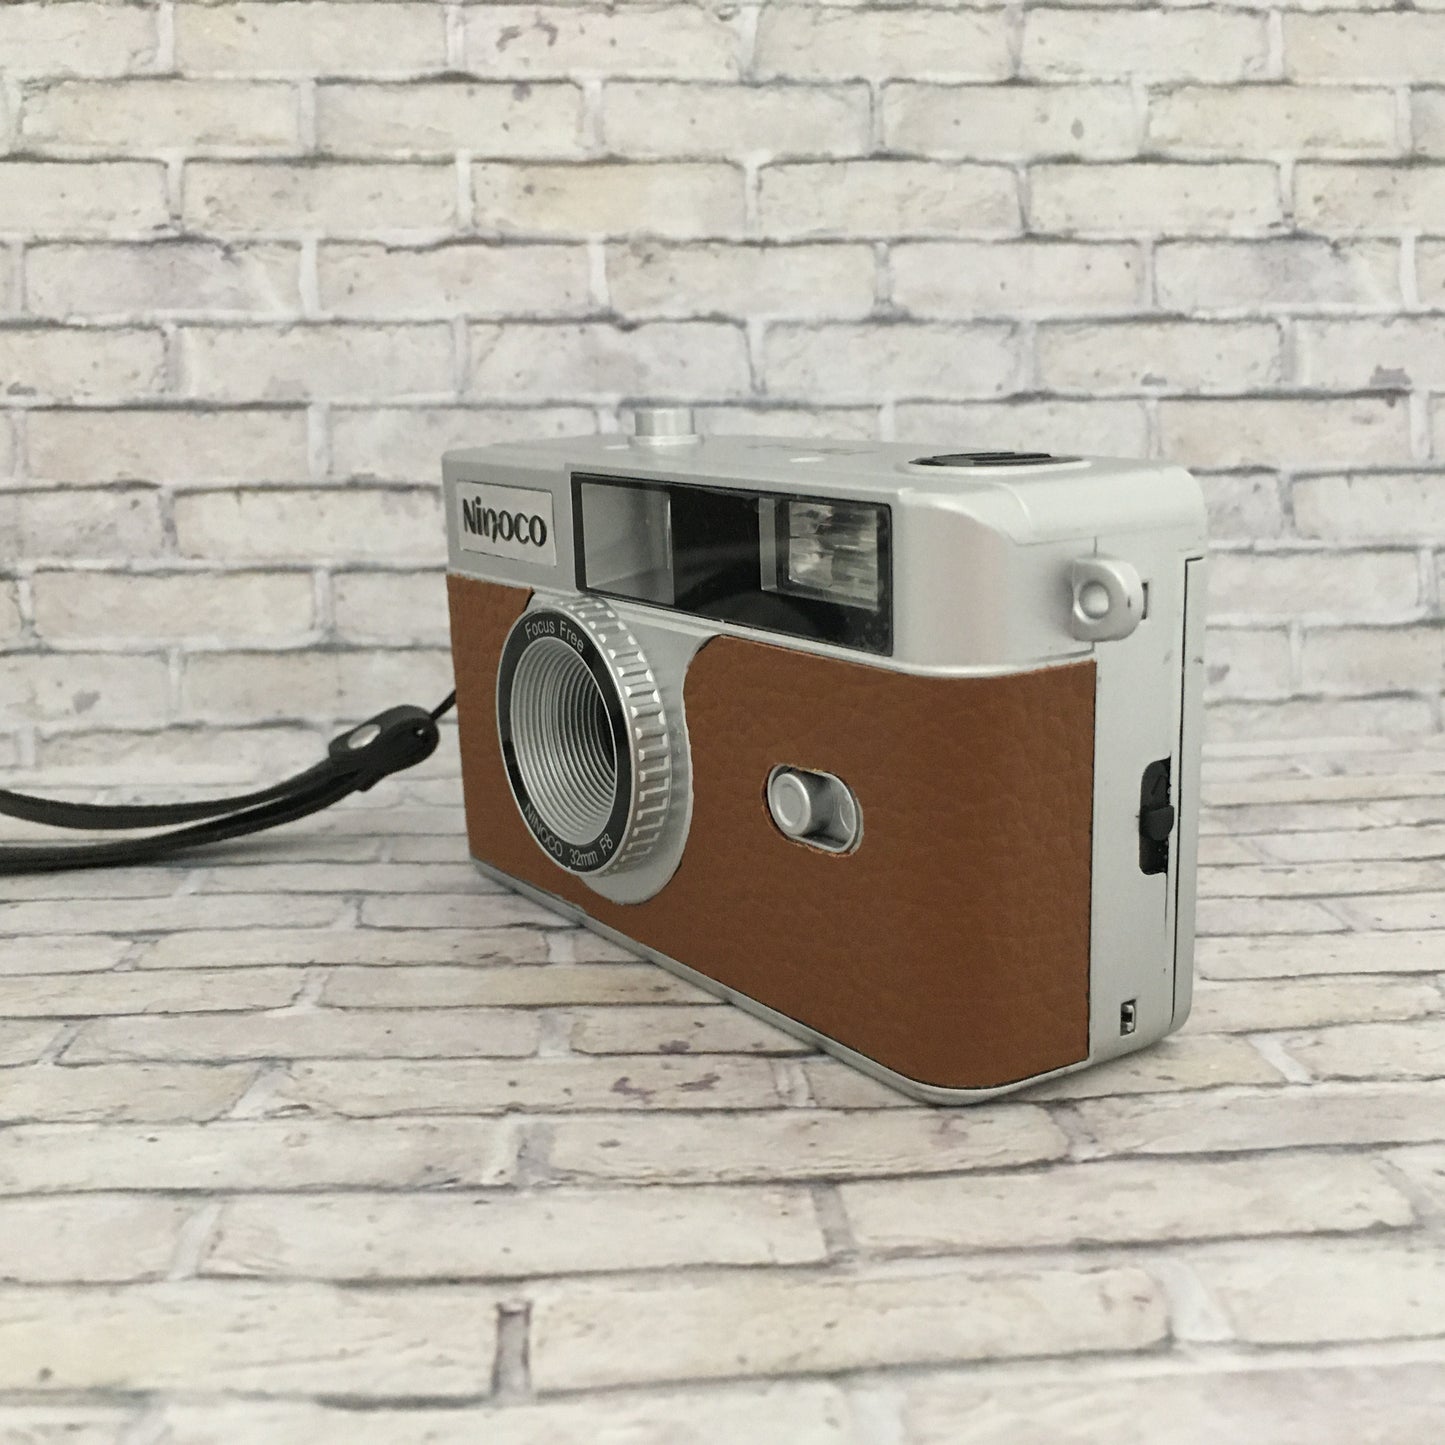 Point & shoot ! Brand new 35mm film camera with cinnamon brown leather